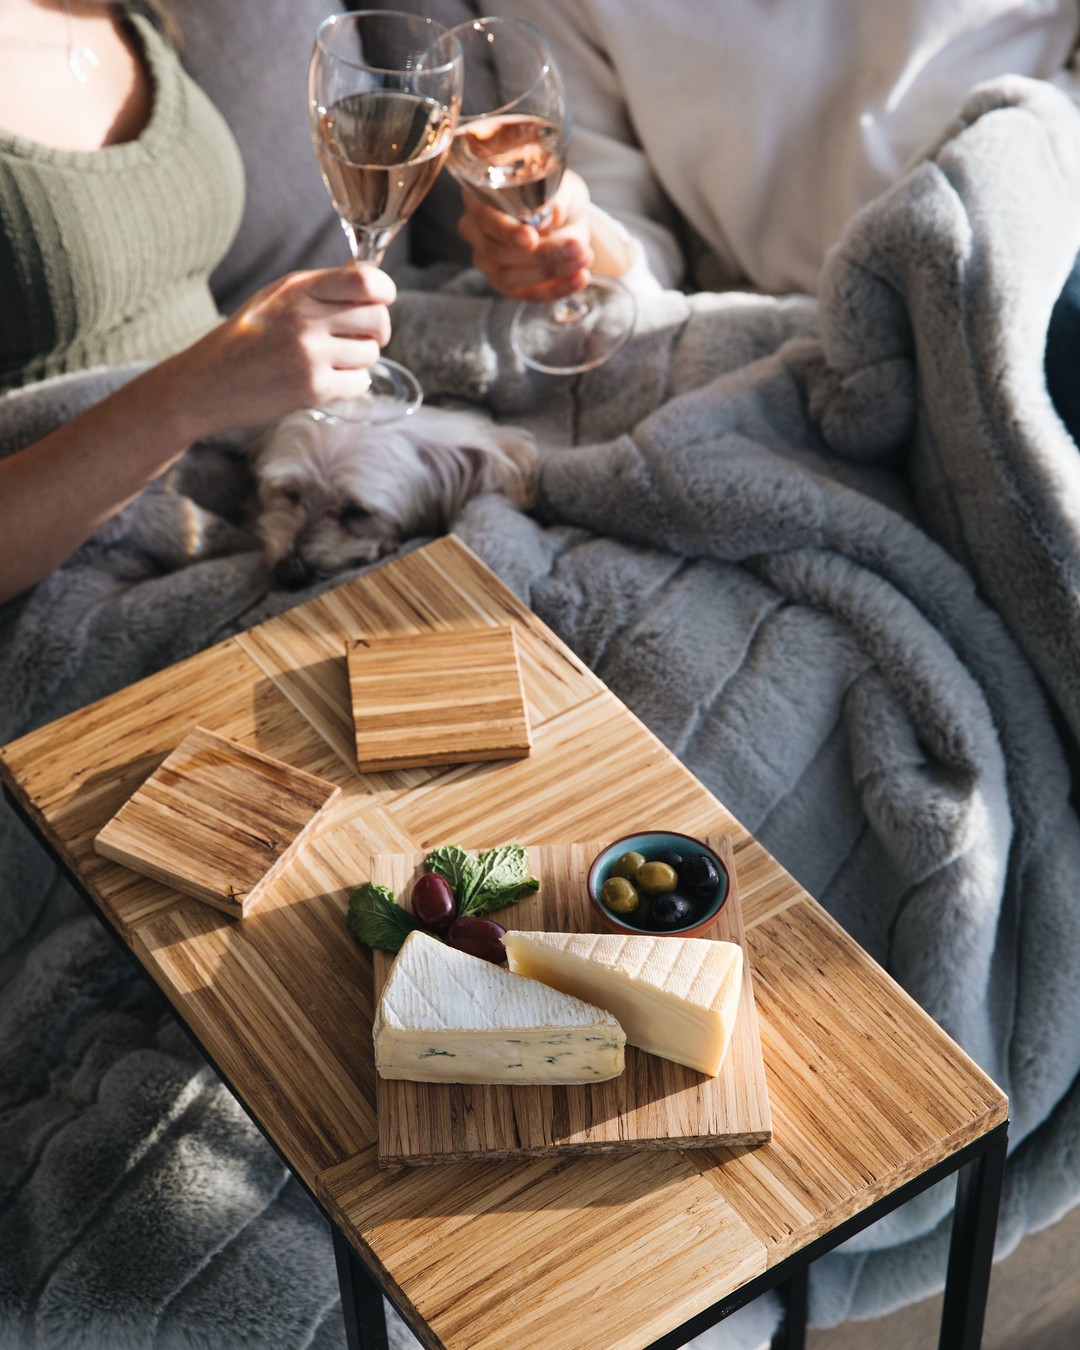 striking wood side table shows wood coasters and cheese board; two people toast with wind and dog sleeps snuggles in gray blanket